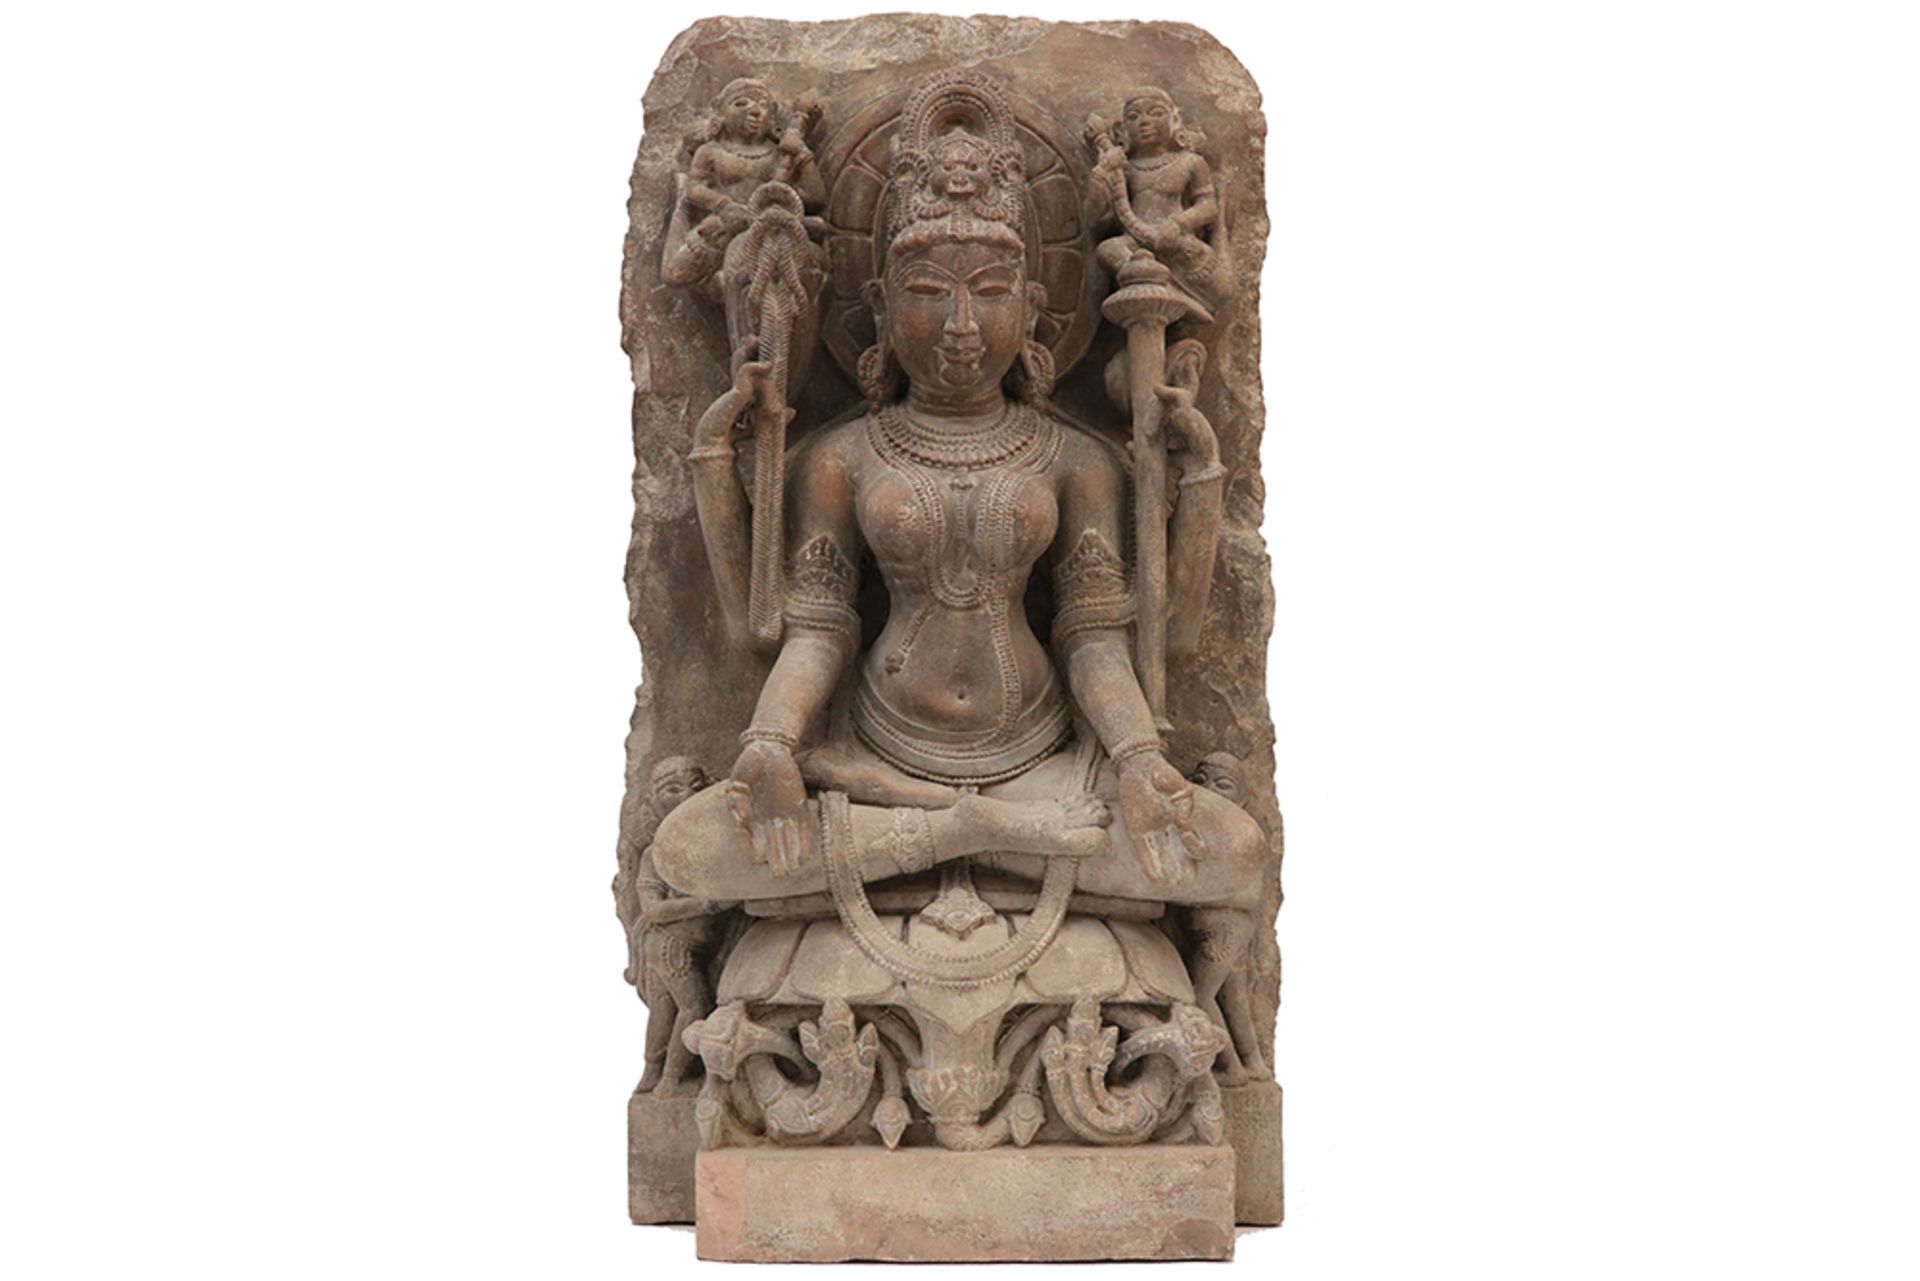 10th/11th Cent. Central Indian Chandella period "Yogini" sculpture in sandstone The sculpture is